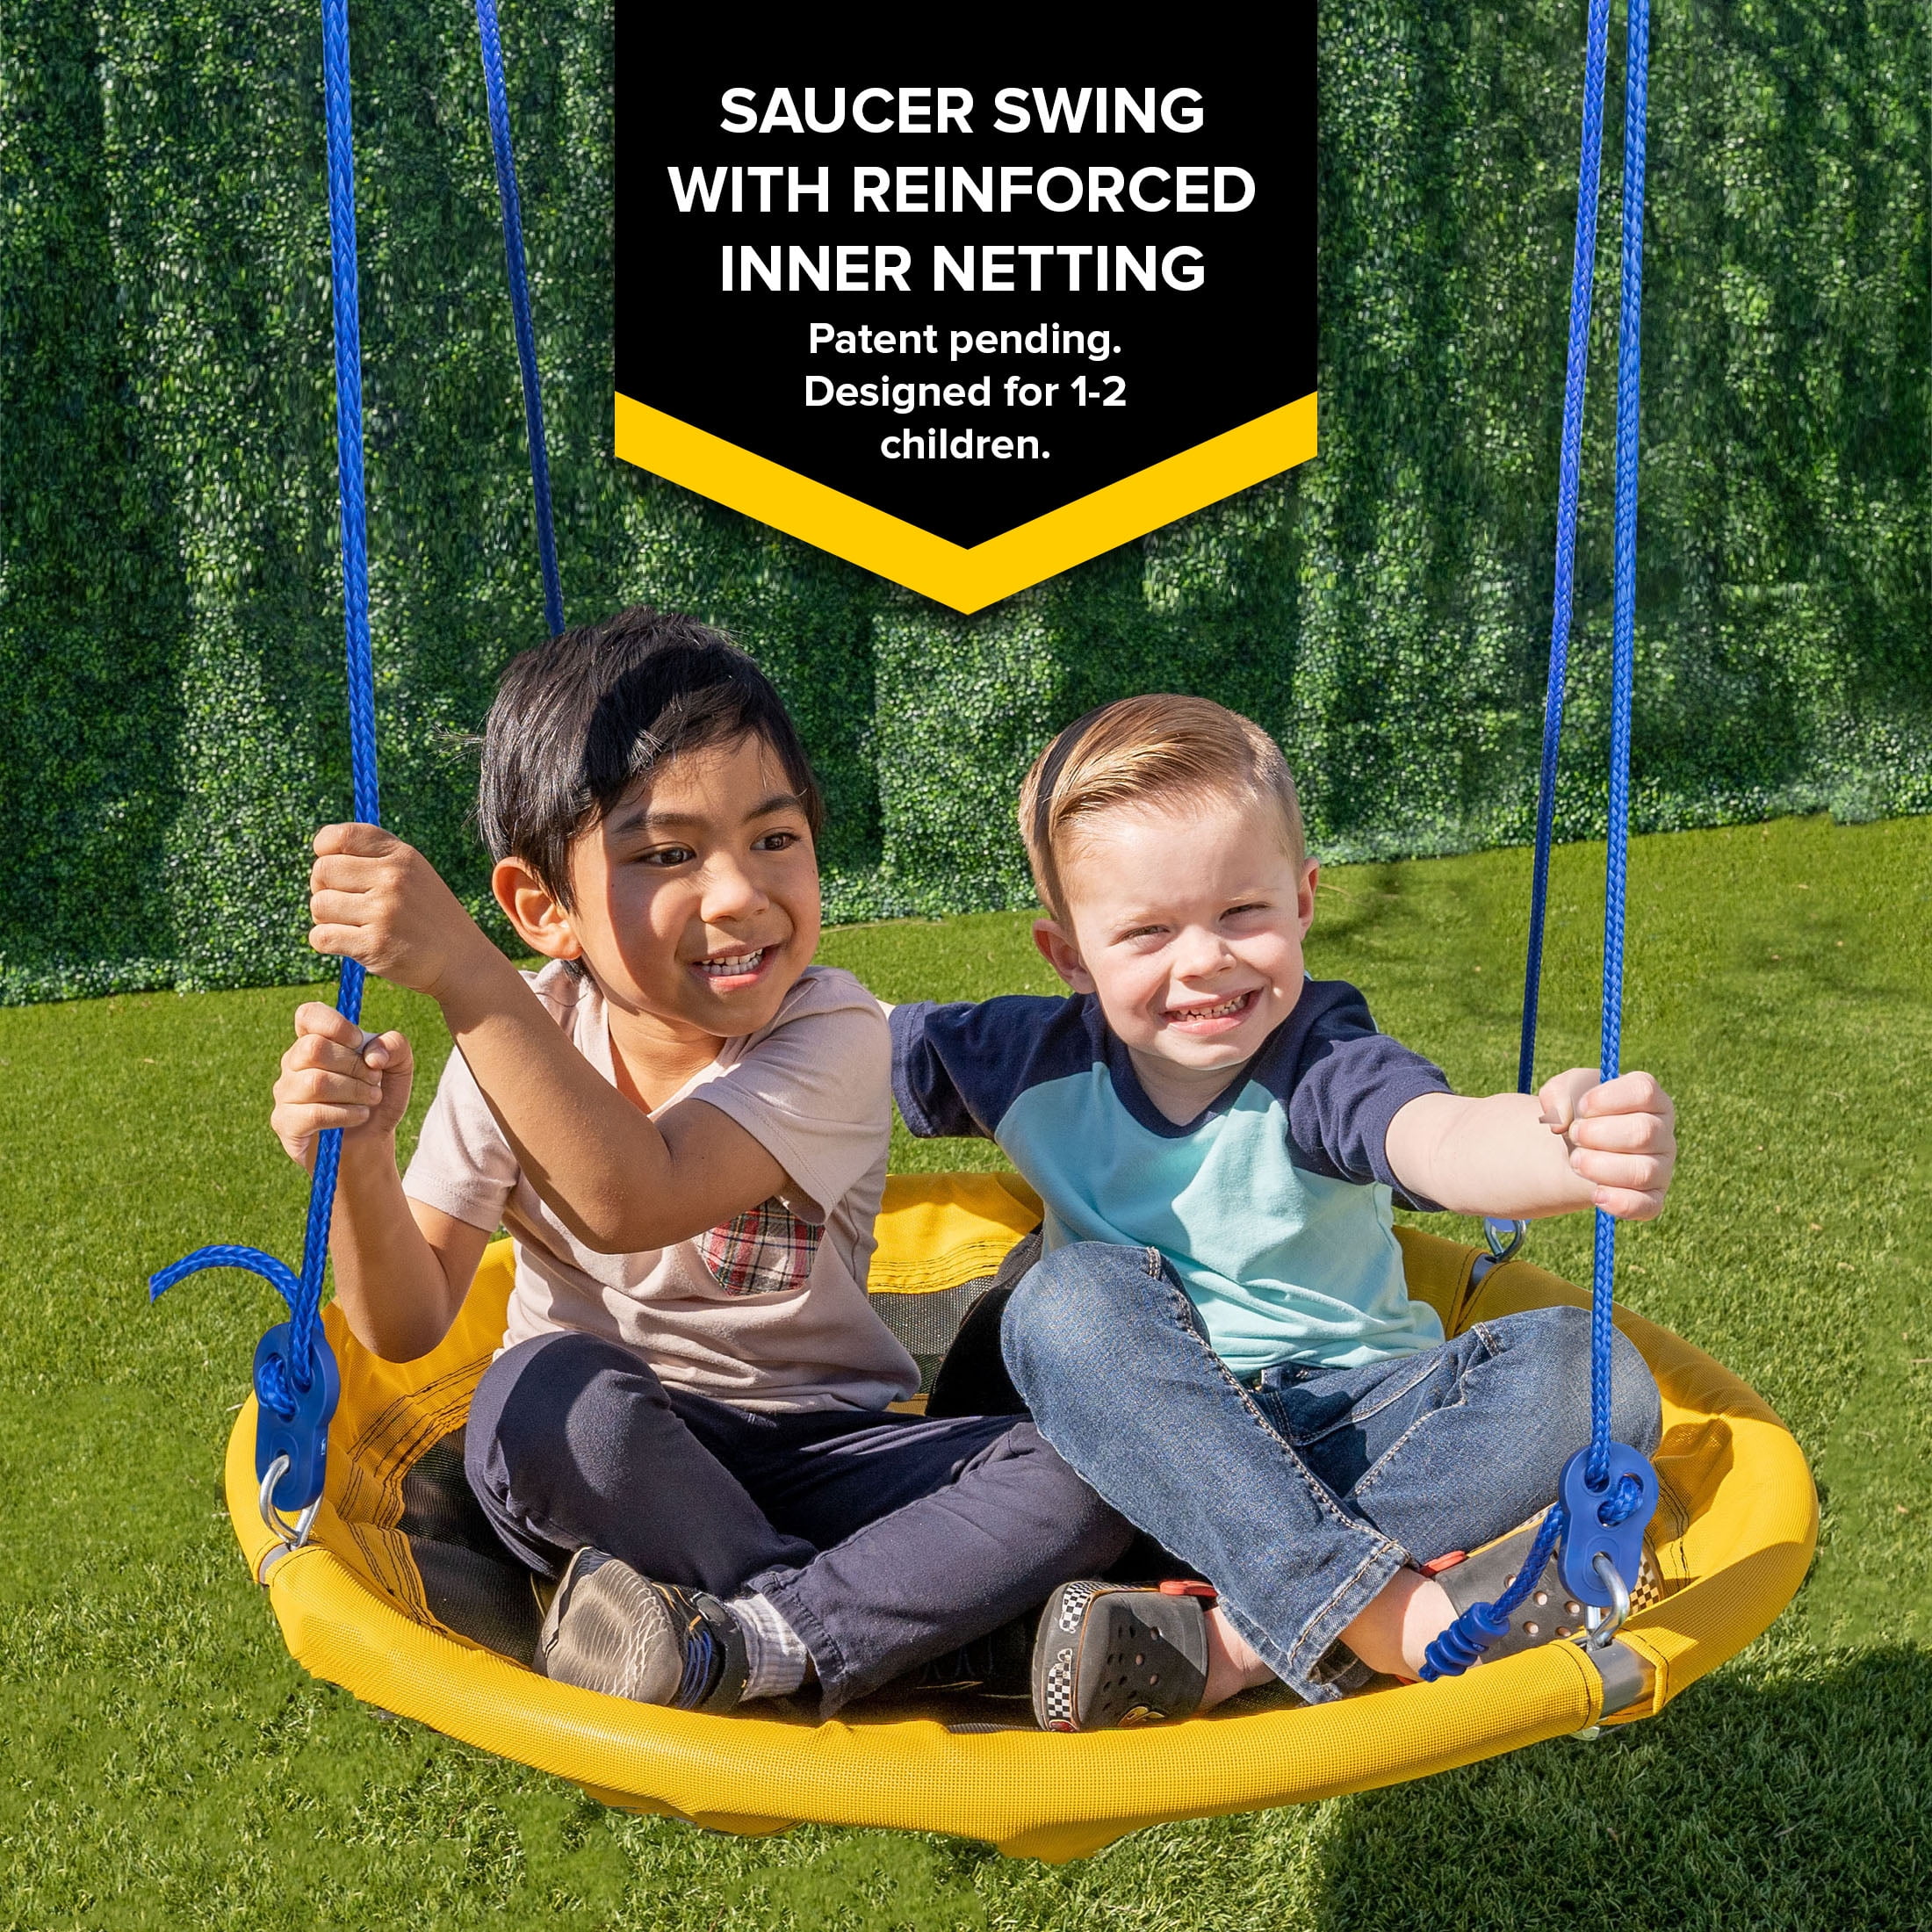 Sportspower Swing and Saucer Swing Metal Set with Heavy Duty Aframe, holds up to 550 lbs - 3